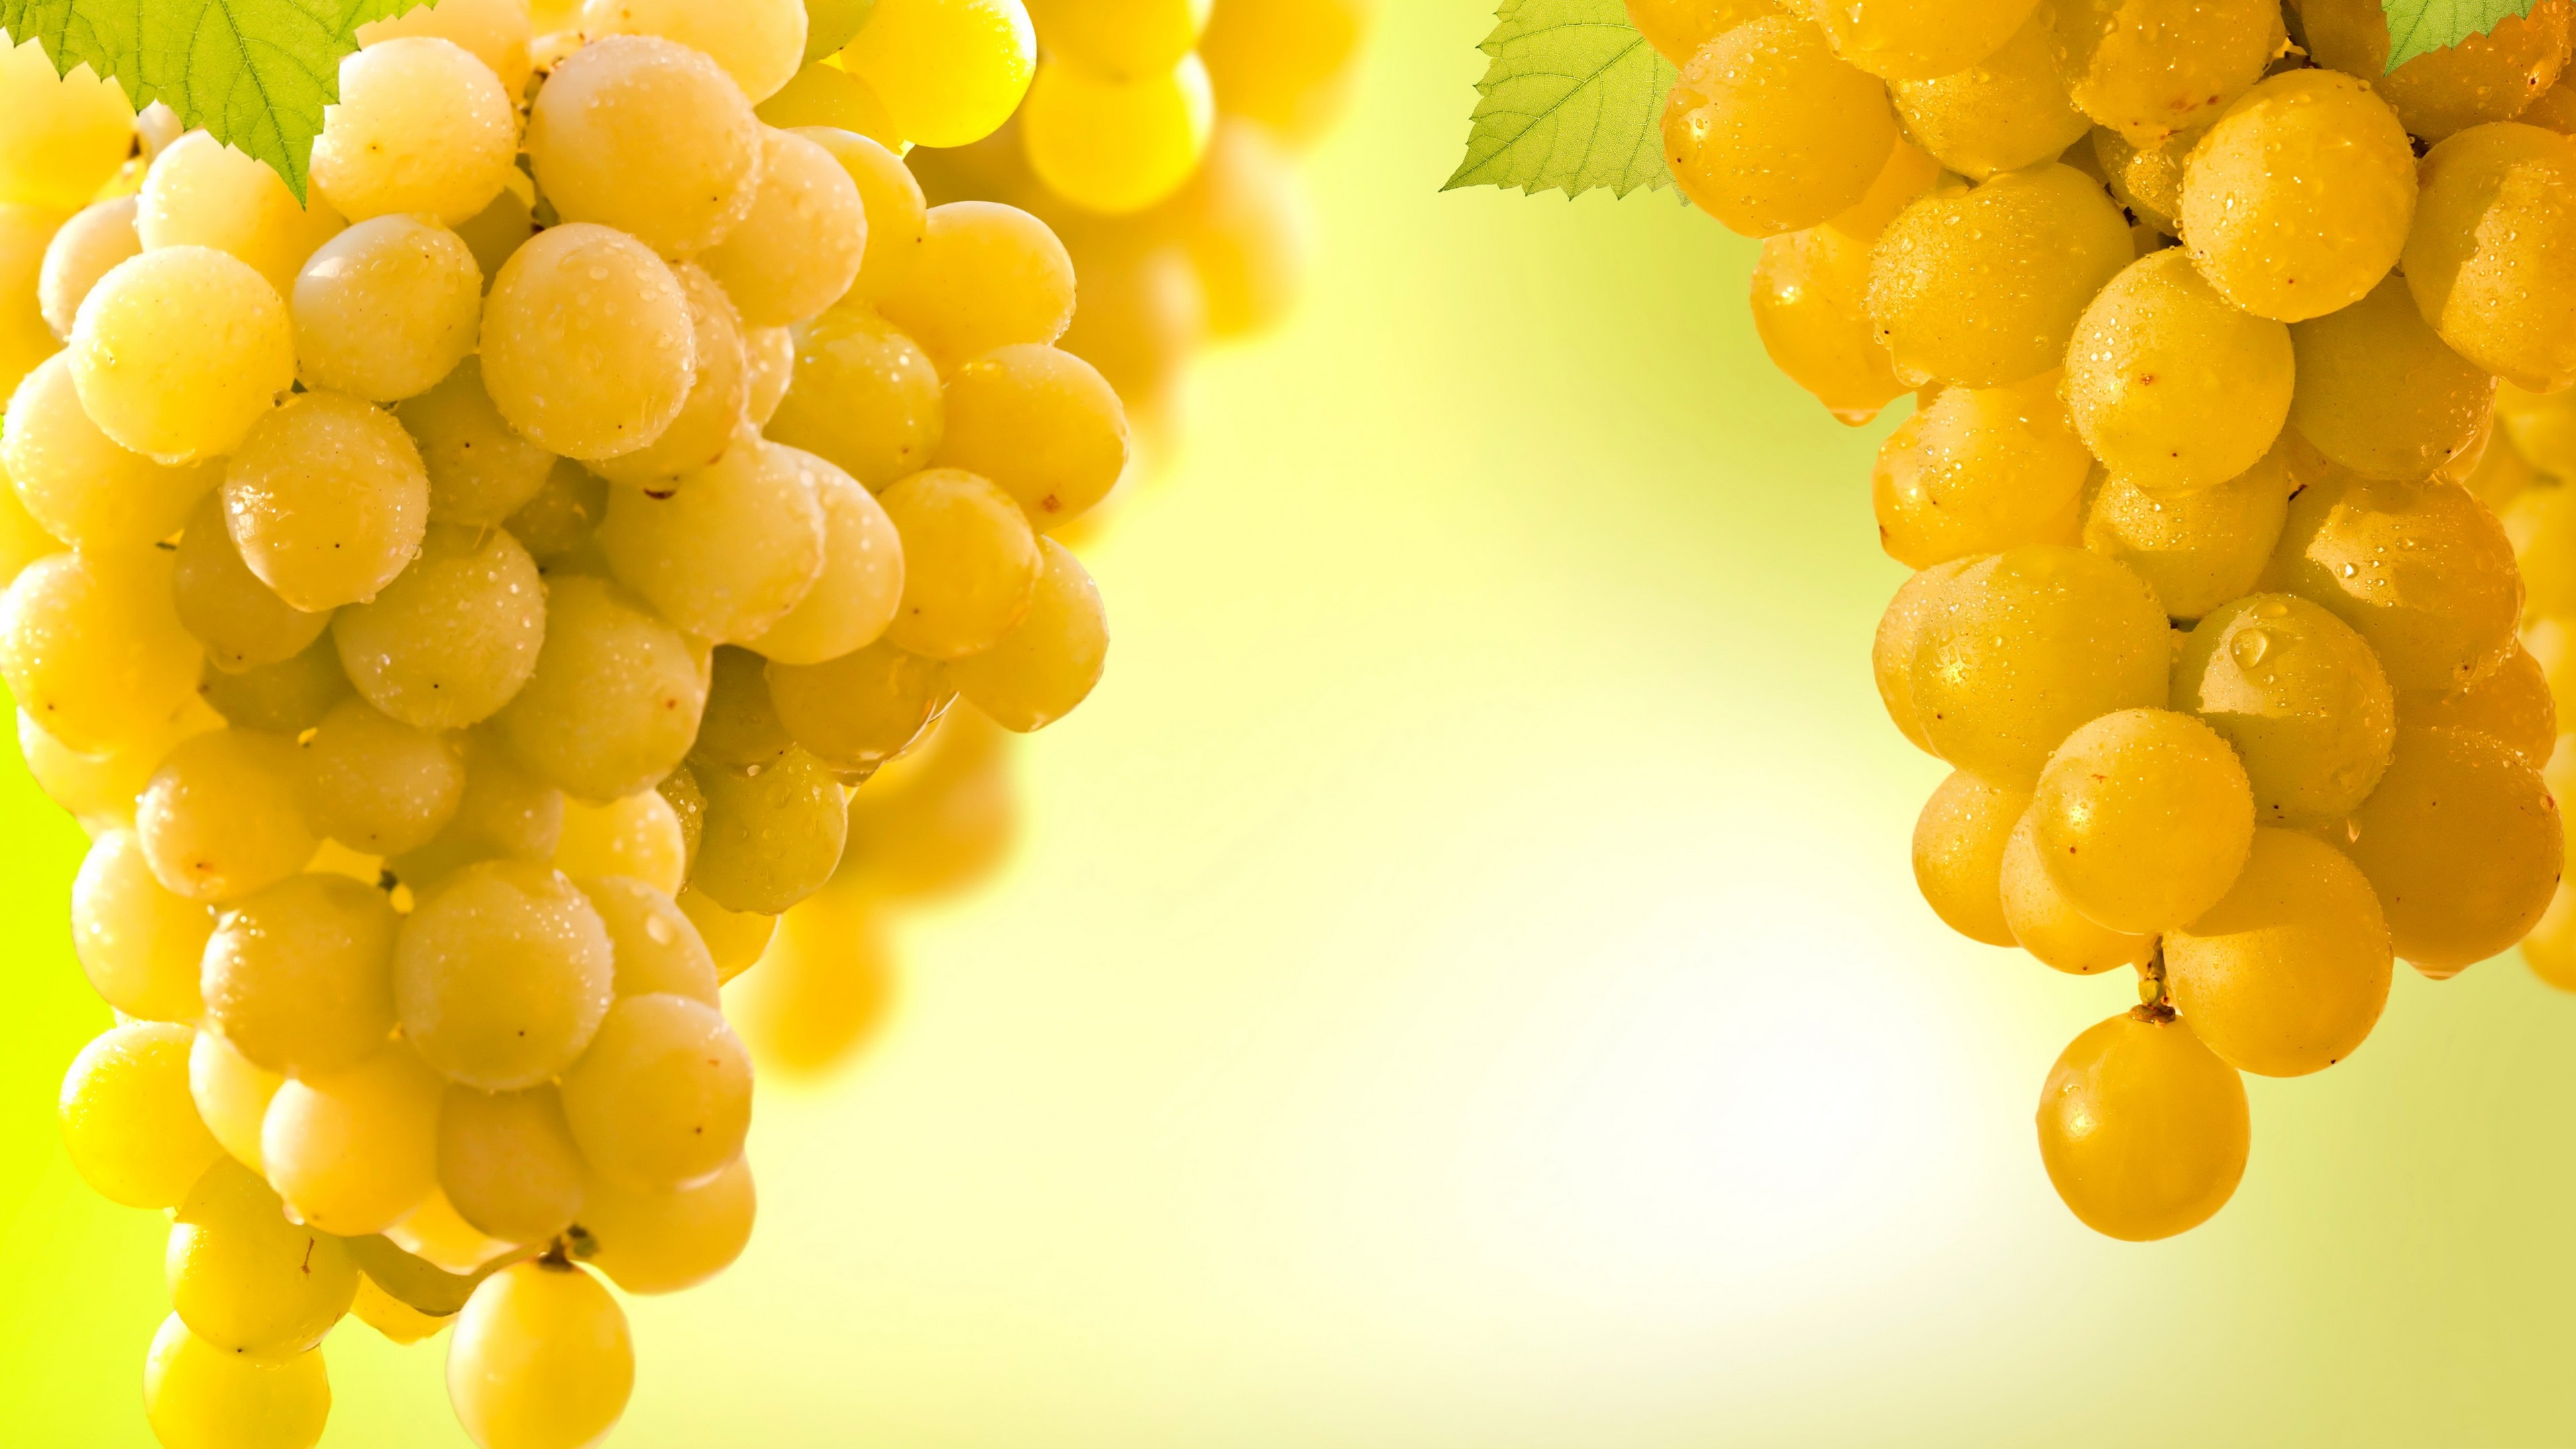 Grapes: Generally occurring in clusters, The Grapevine family. 3840x2160 4K Wallpaper.